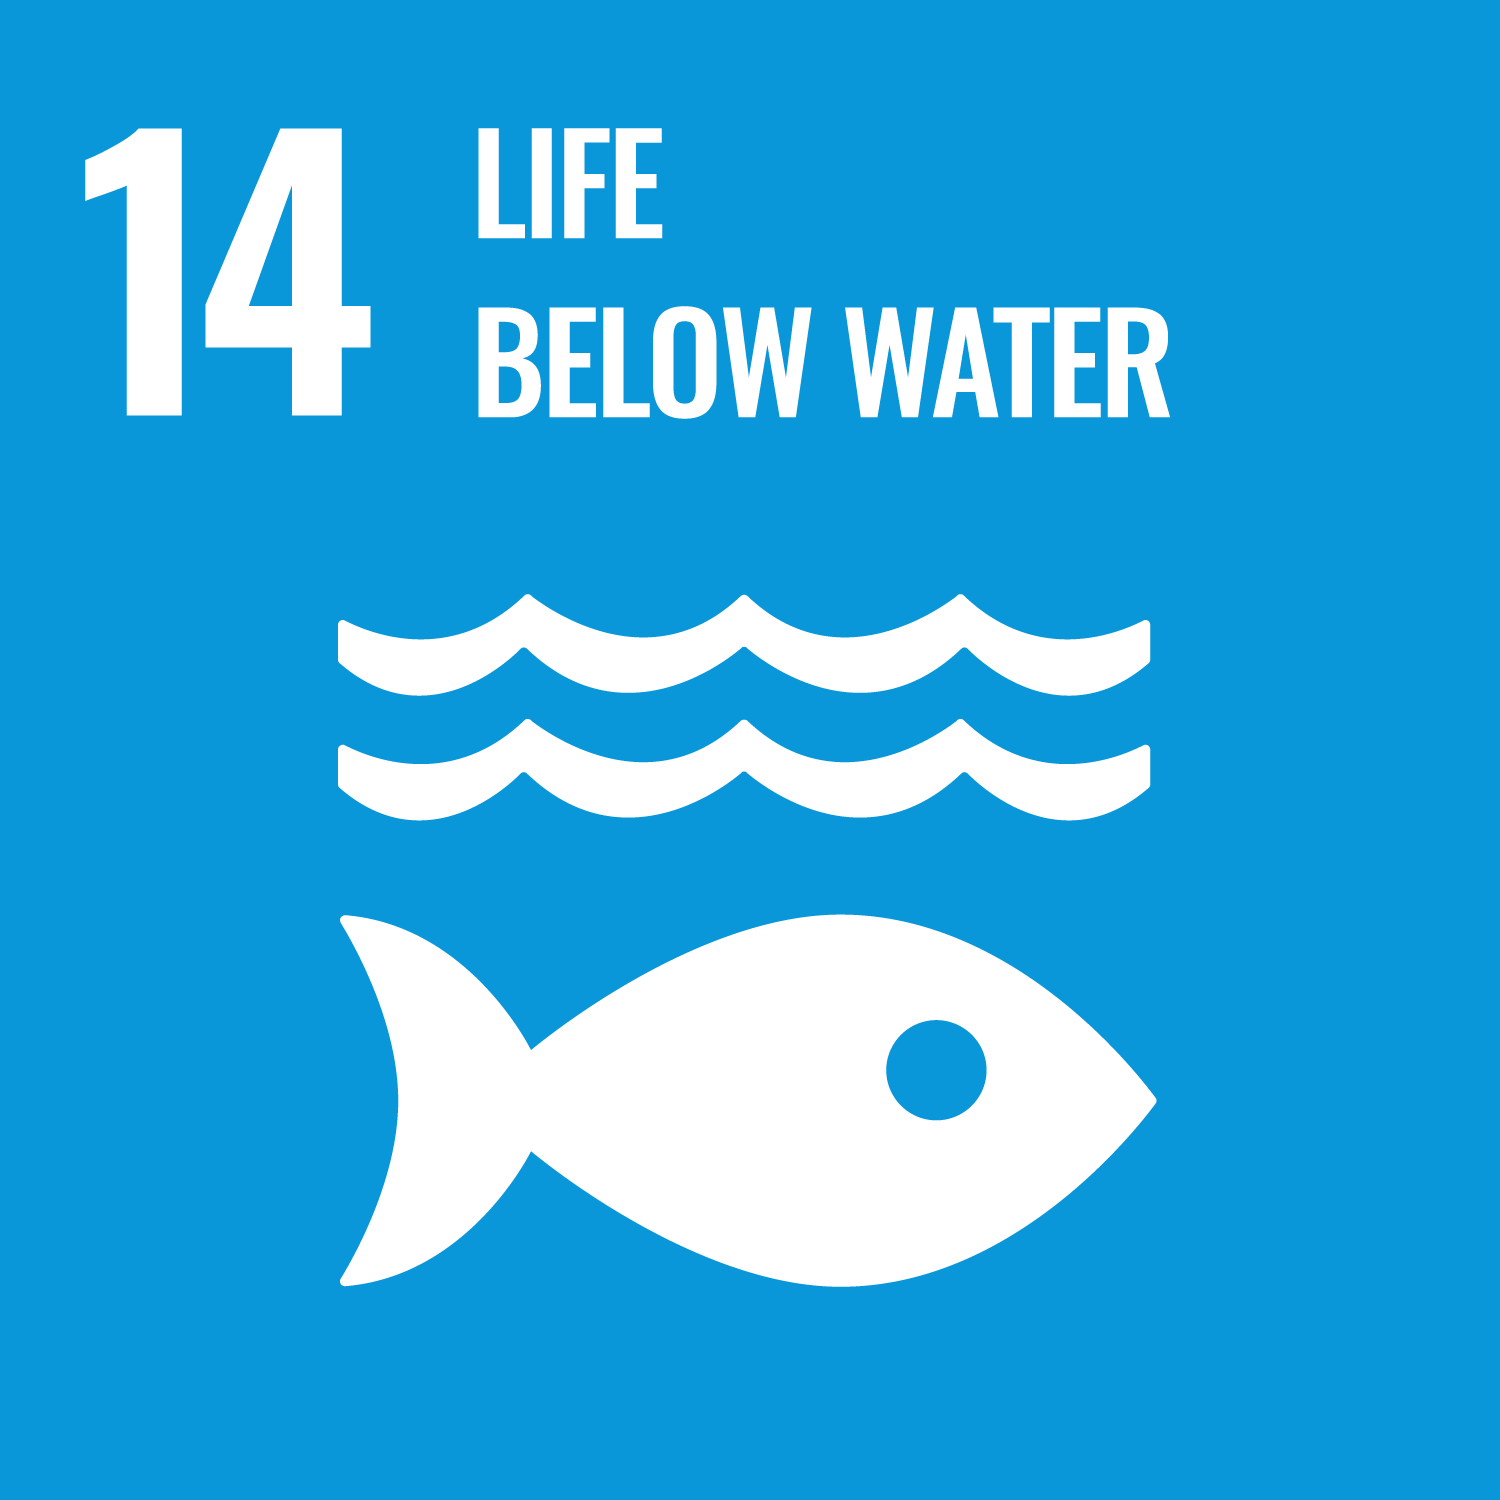 An icon of UN SDG #14 - Life Below Water. It depicts a fish underneath water lines against a blue background.